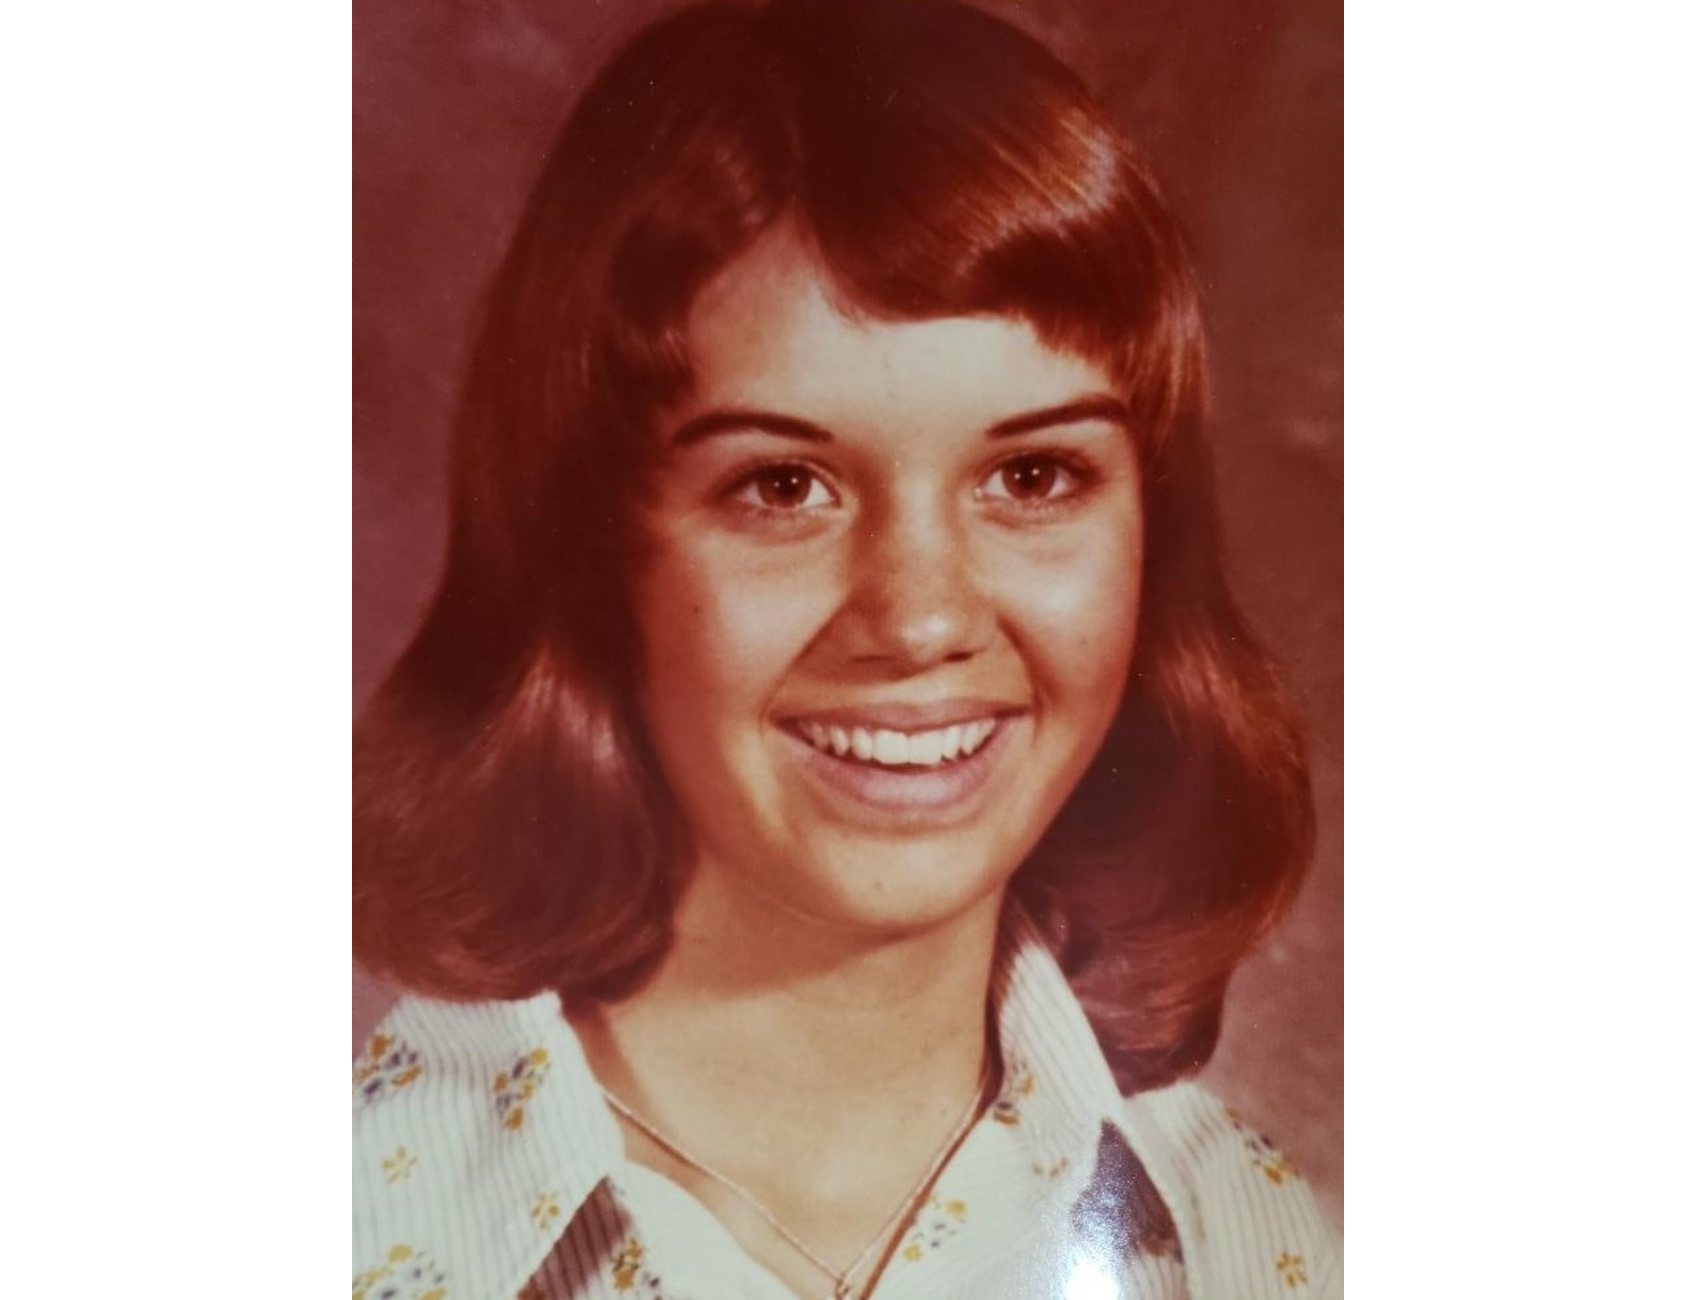 Cynthia Dawn Kinney vanished from a laundromat in Oklahoma in 1976